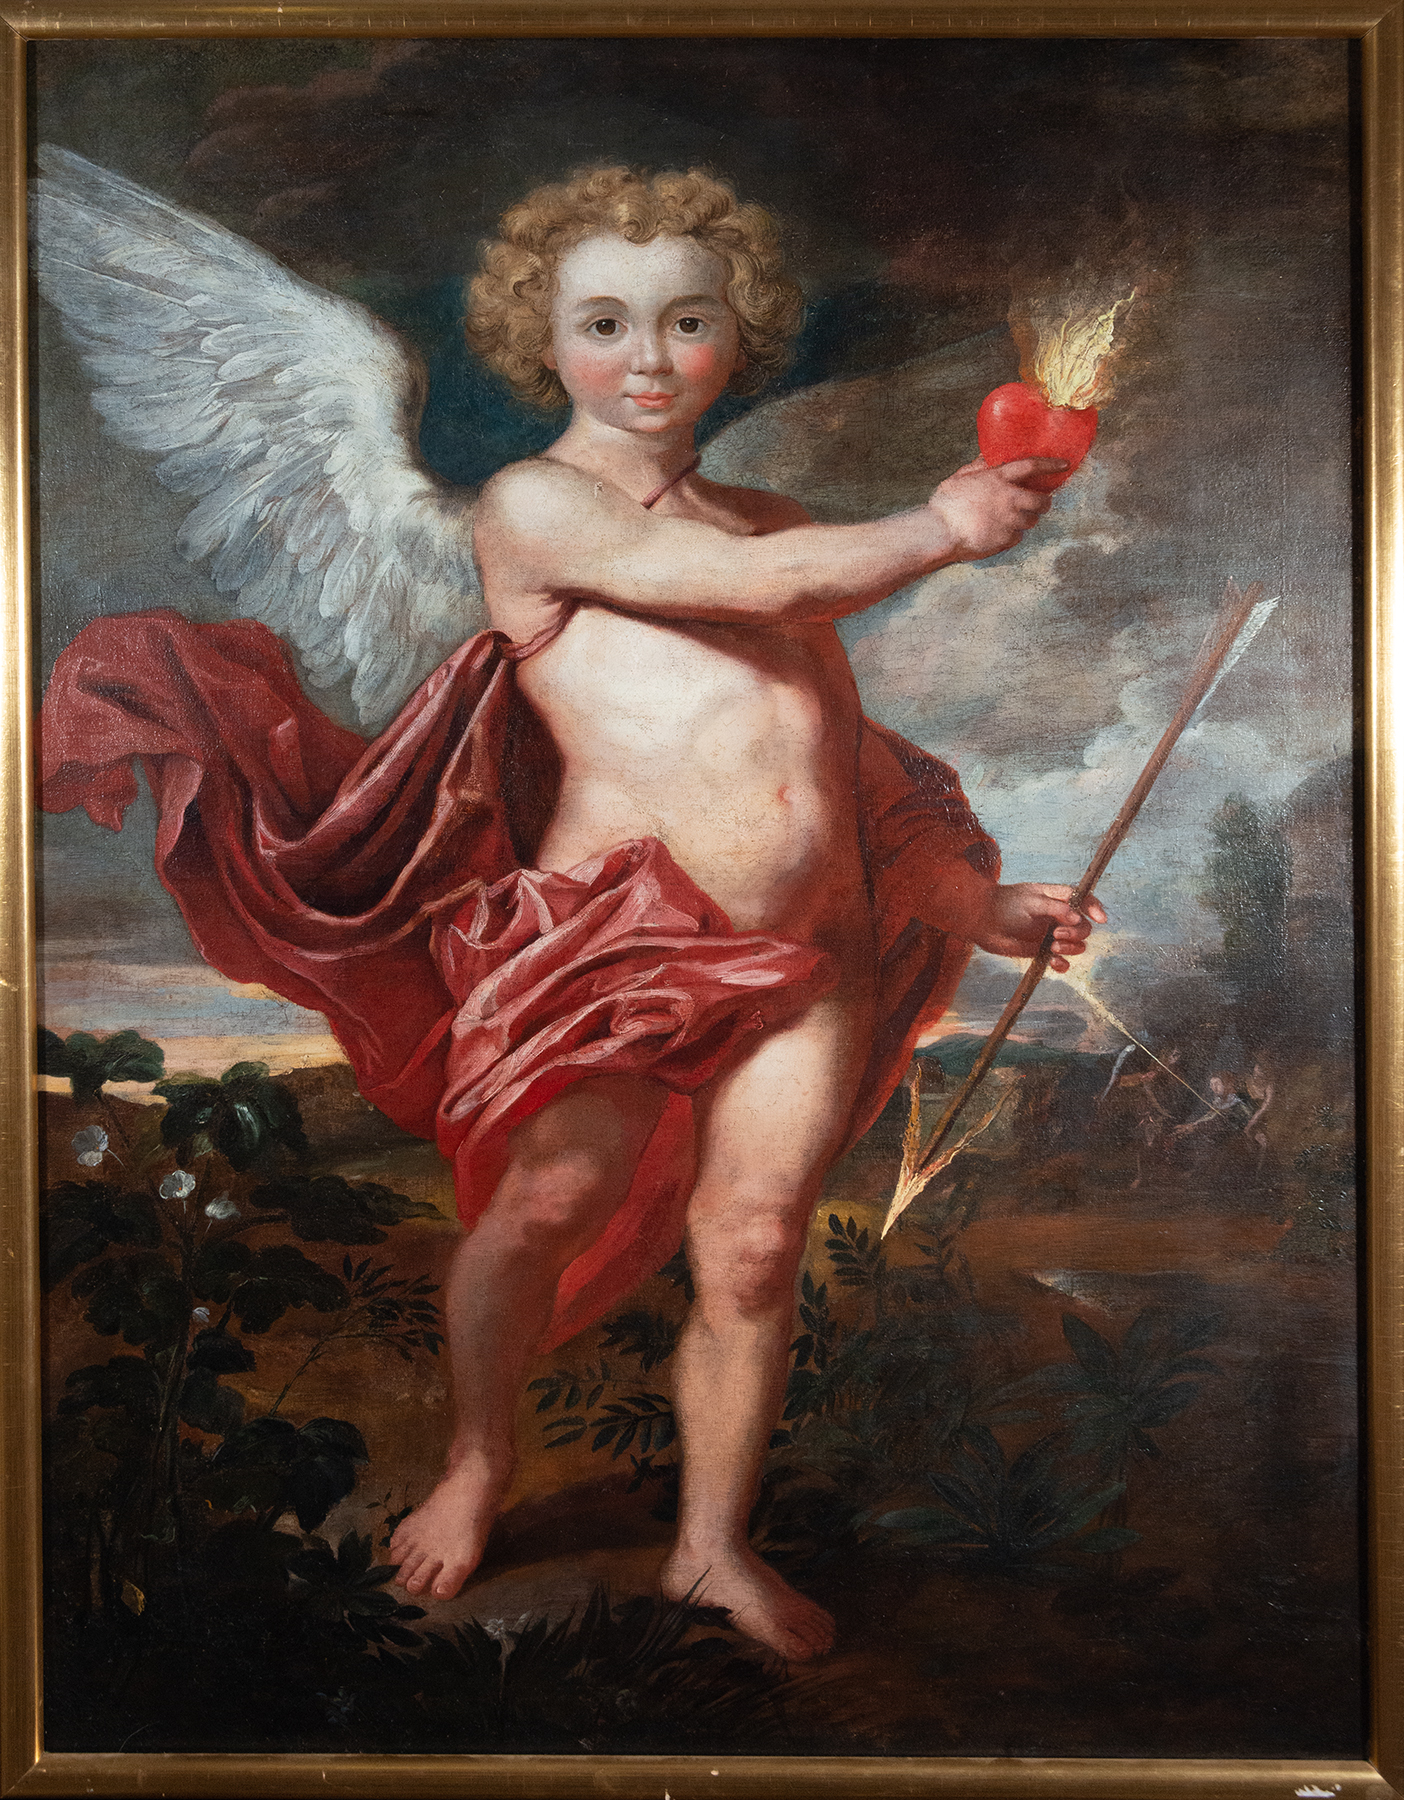 Triumphant Cupid or "The Triumph of Love", Flemish school of the 17th century